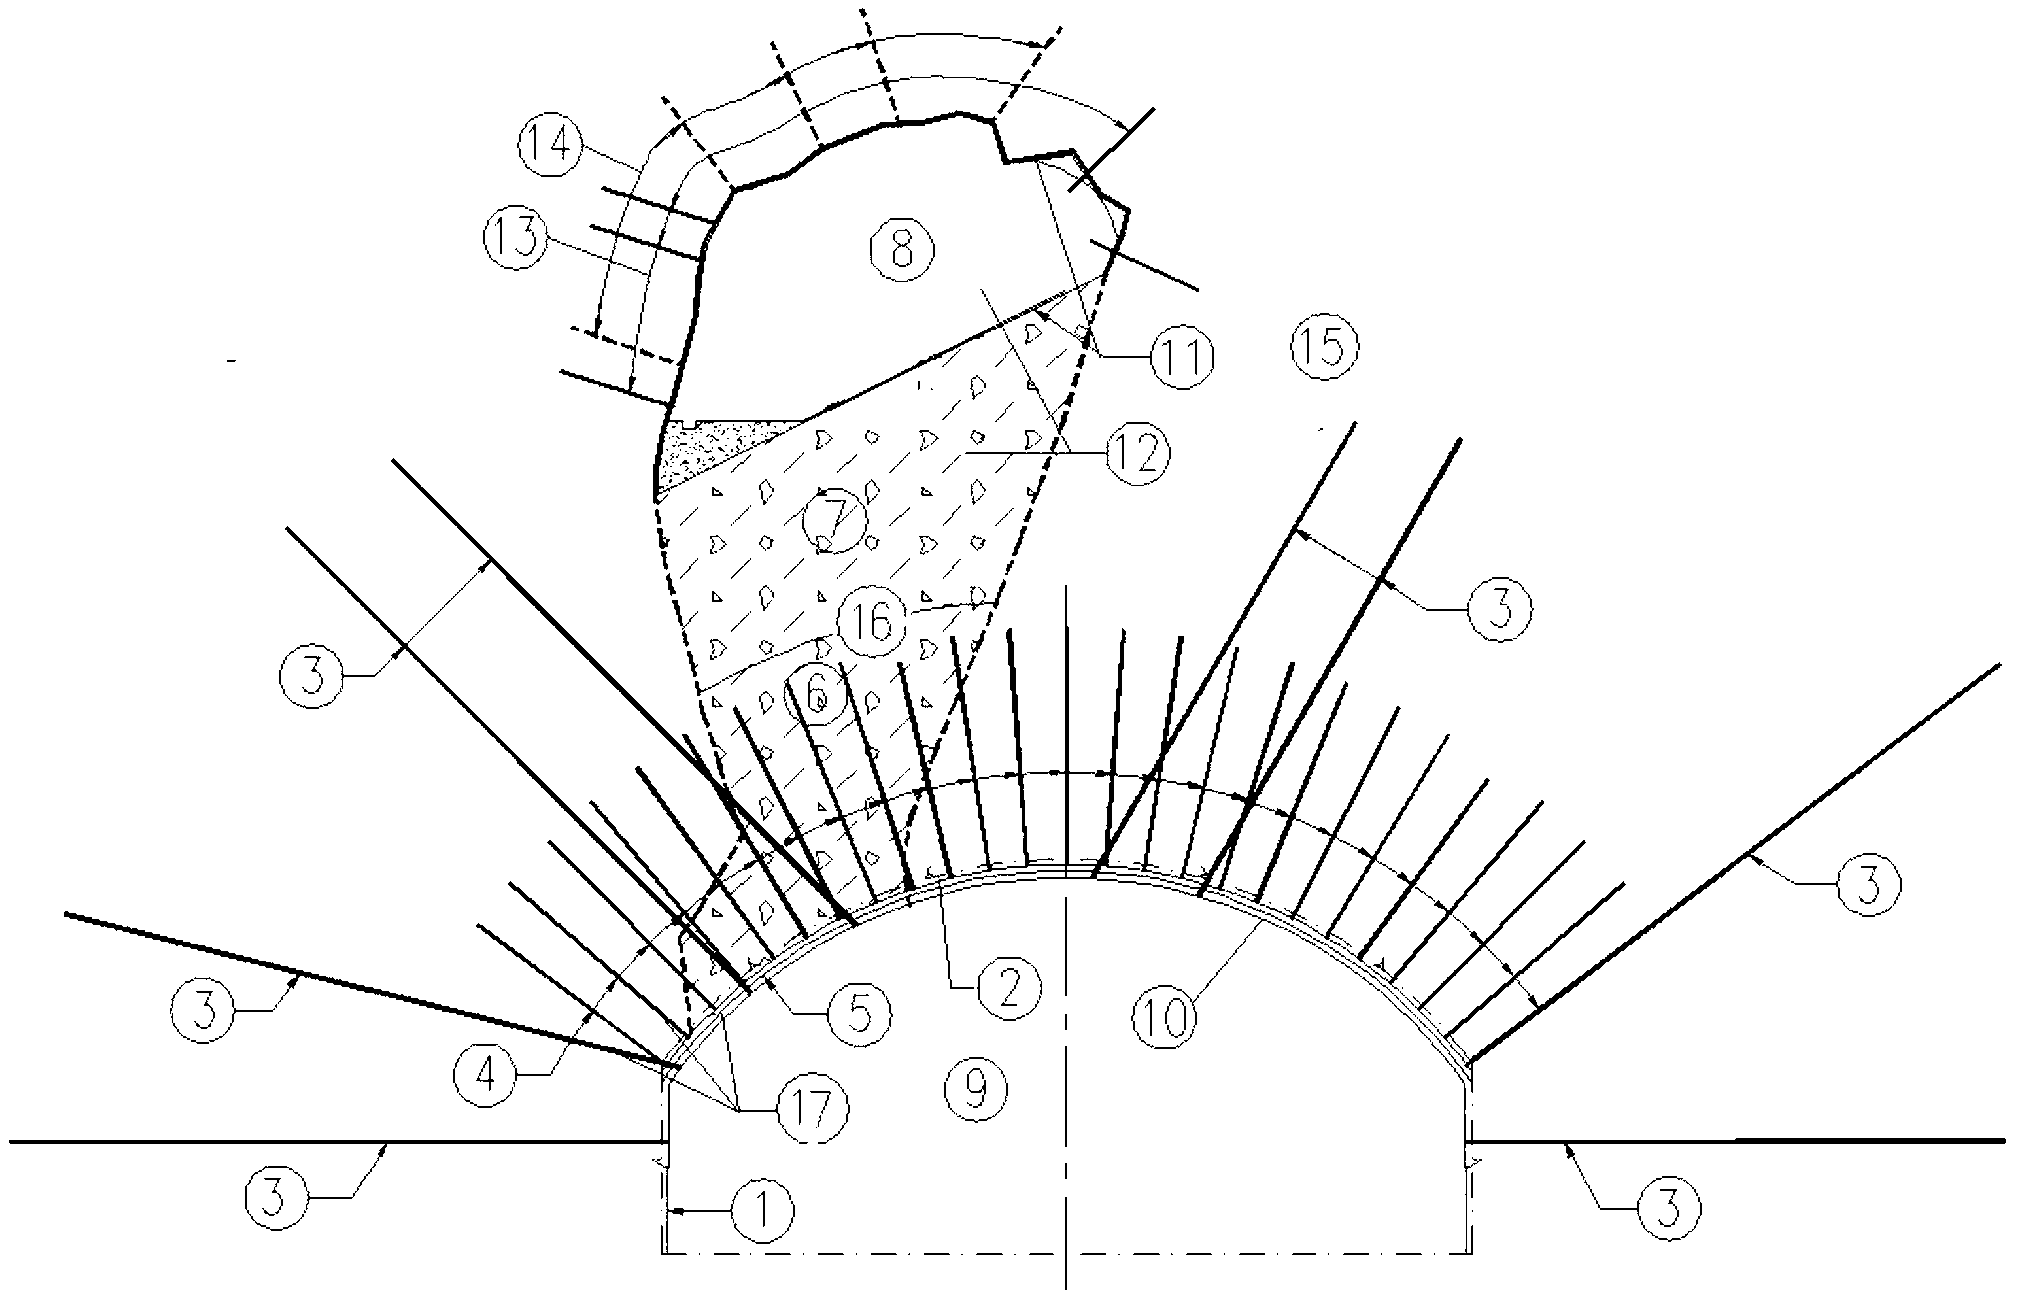 Method of treating lining after collapse of underground cavern crown